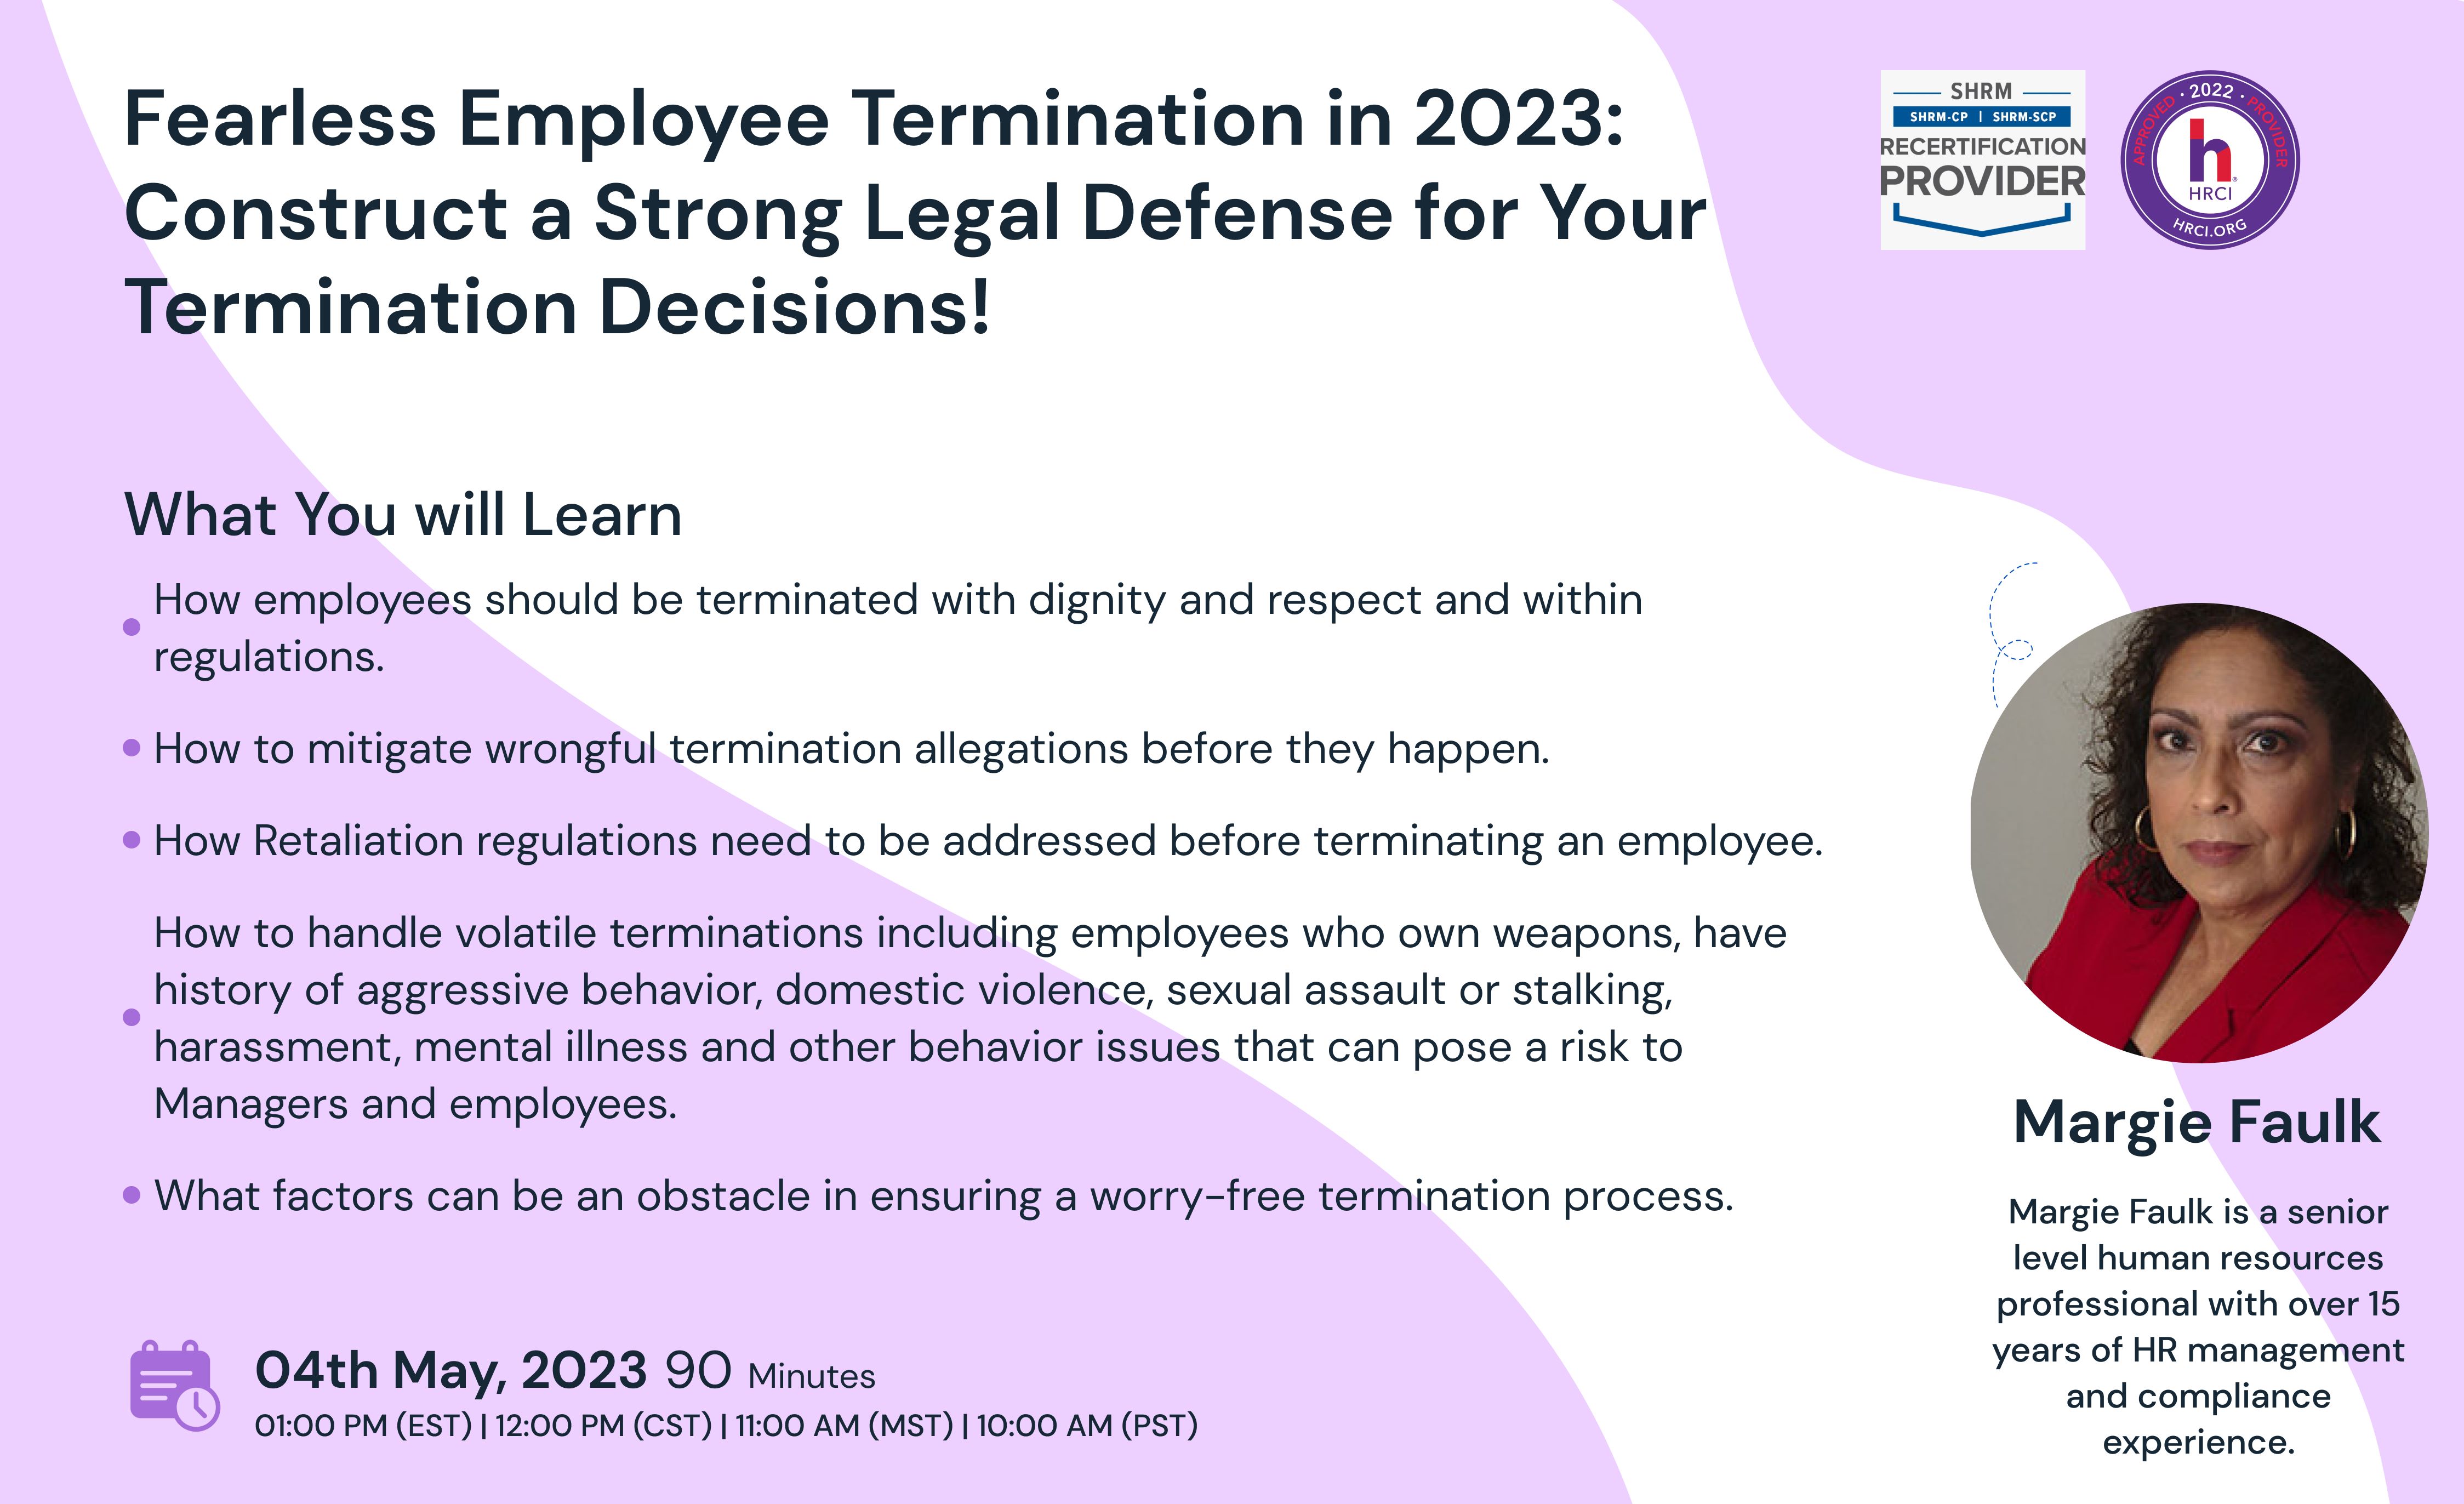 Fearless Employee Termination in 2023: Construct a Strong Legal Defense for Your Termination Decisions!